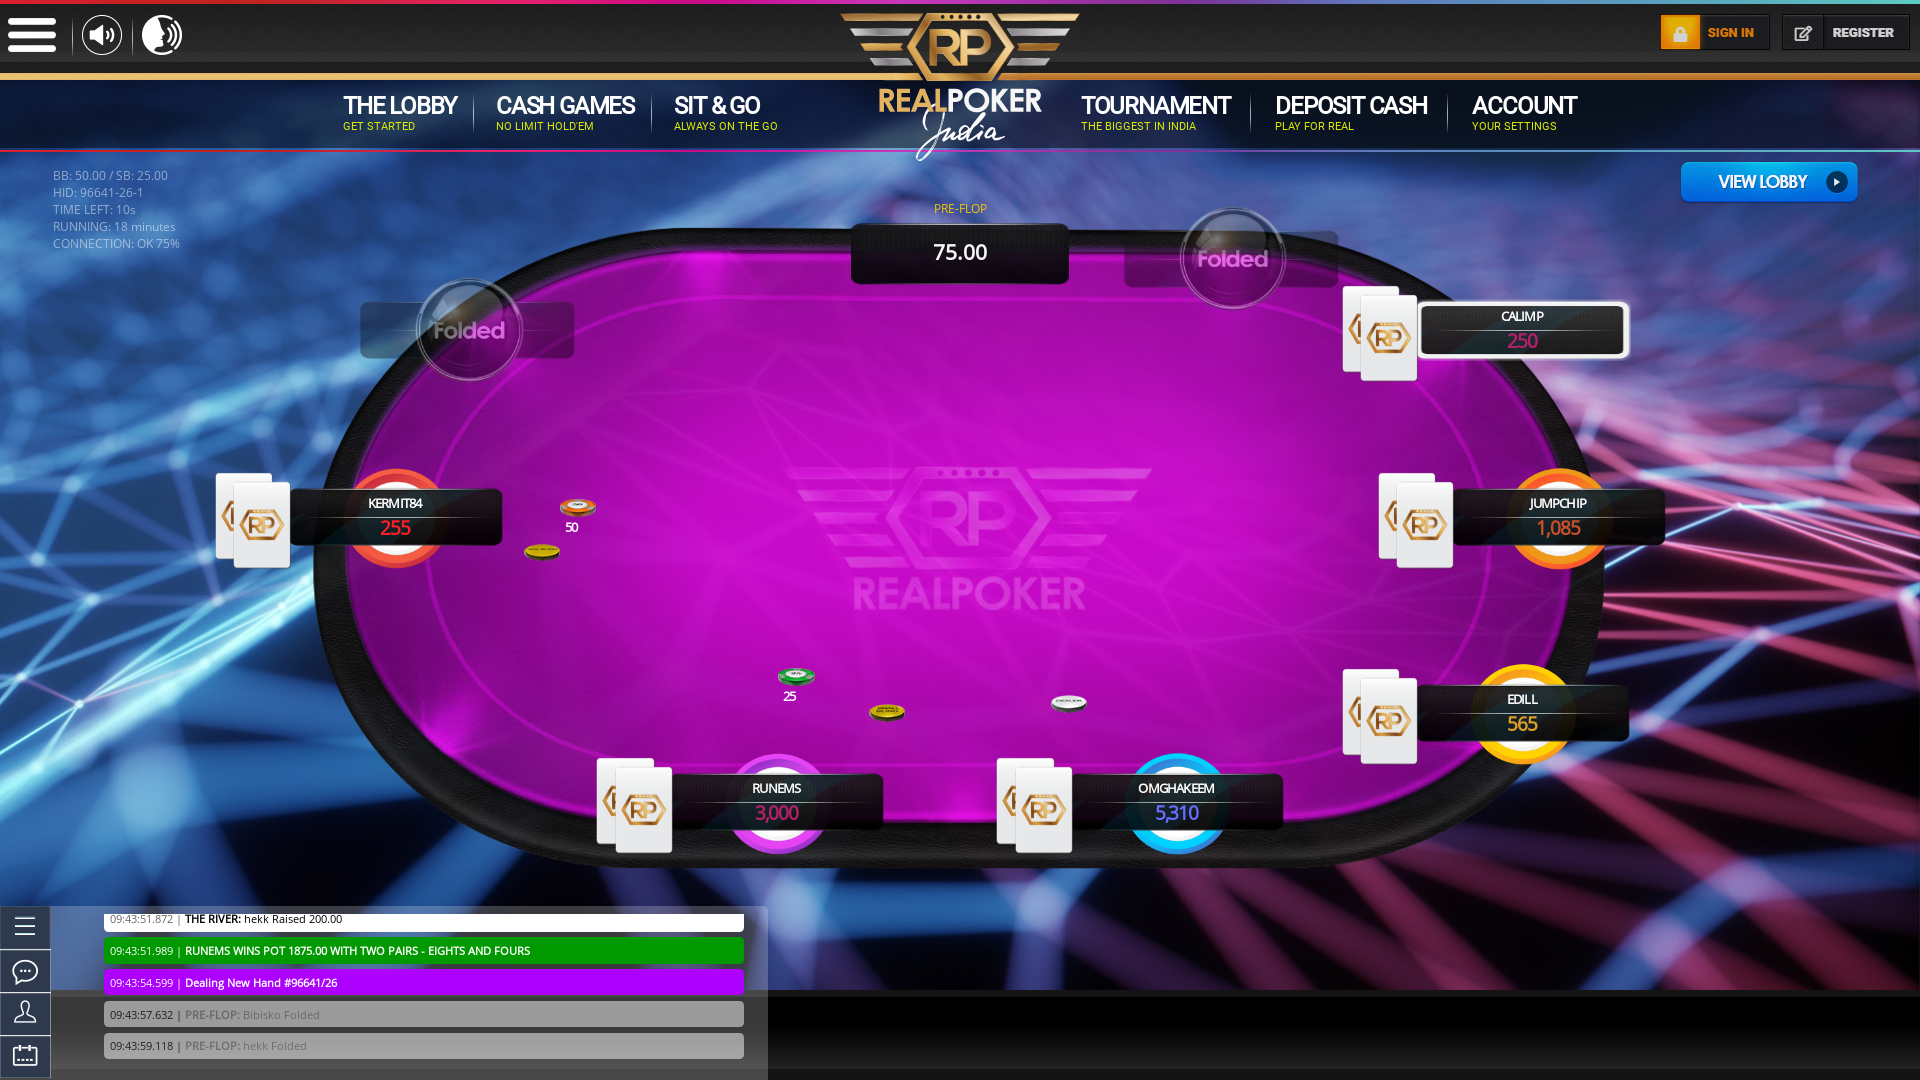 Online poker on a 10 player table in the 18th minute match up